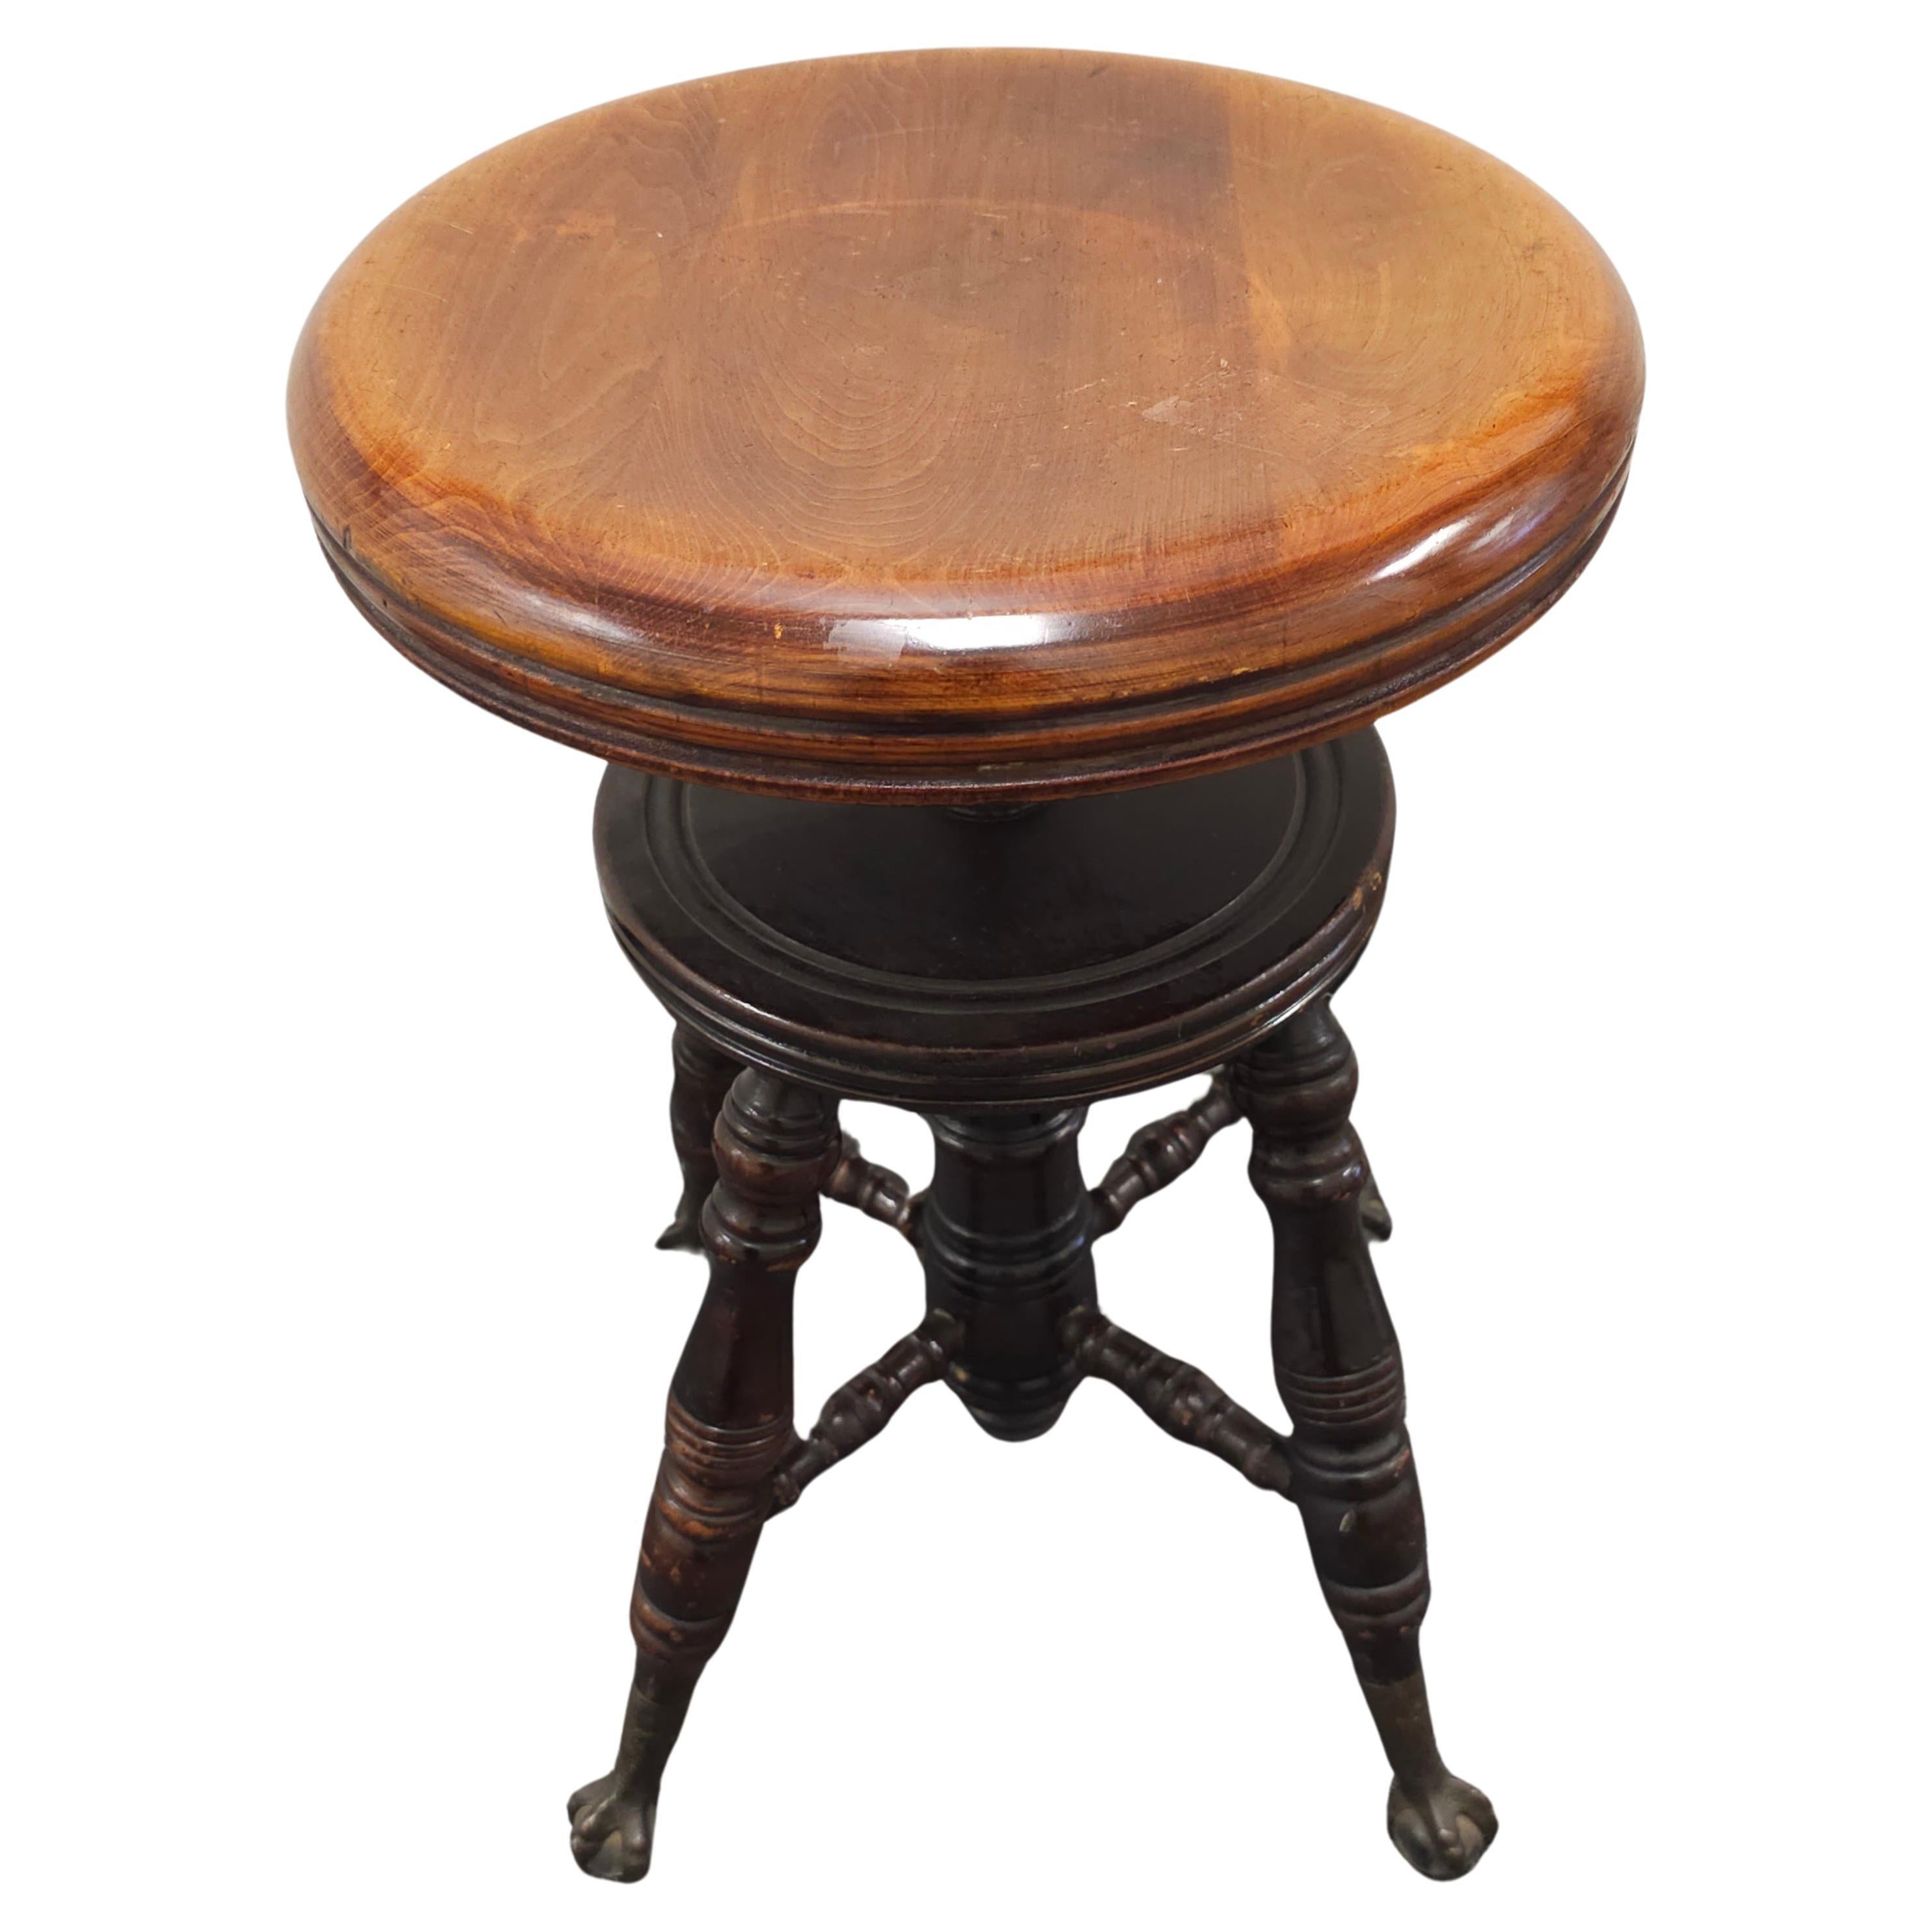 Mid-19th C. Charles Parker Mahogany and Iron Piano Stool with Ball Claw Feet For Sale